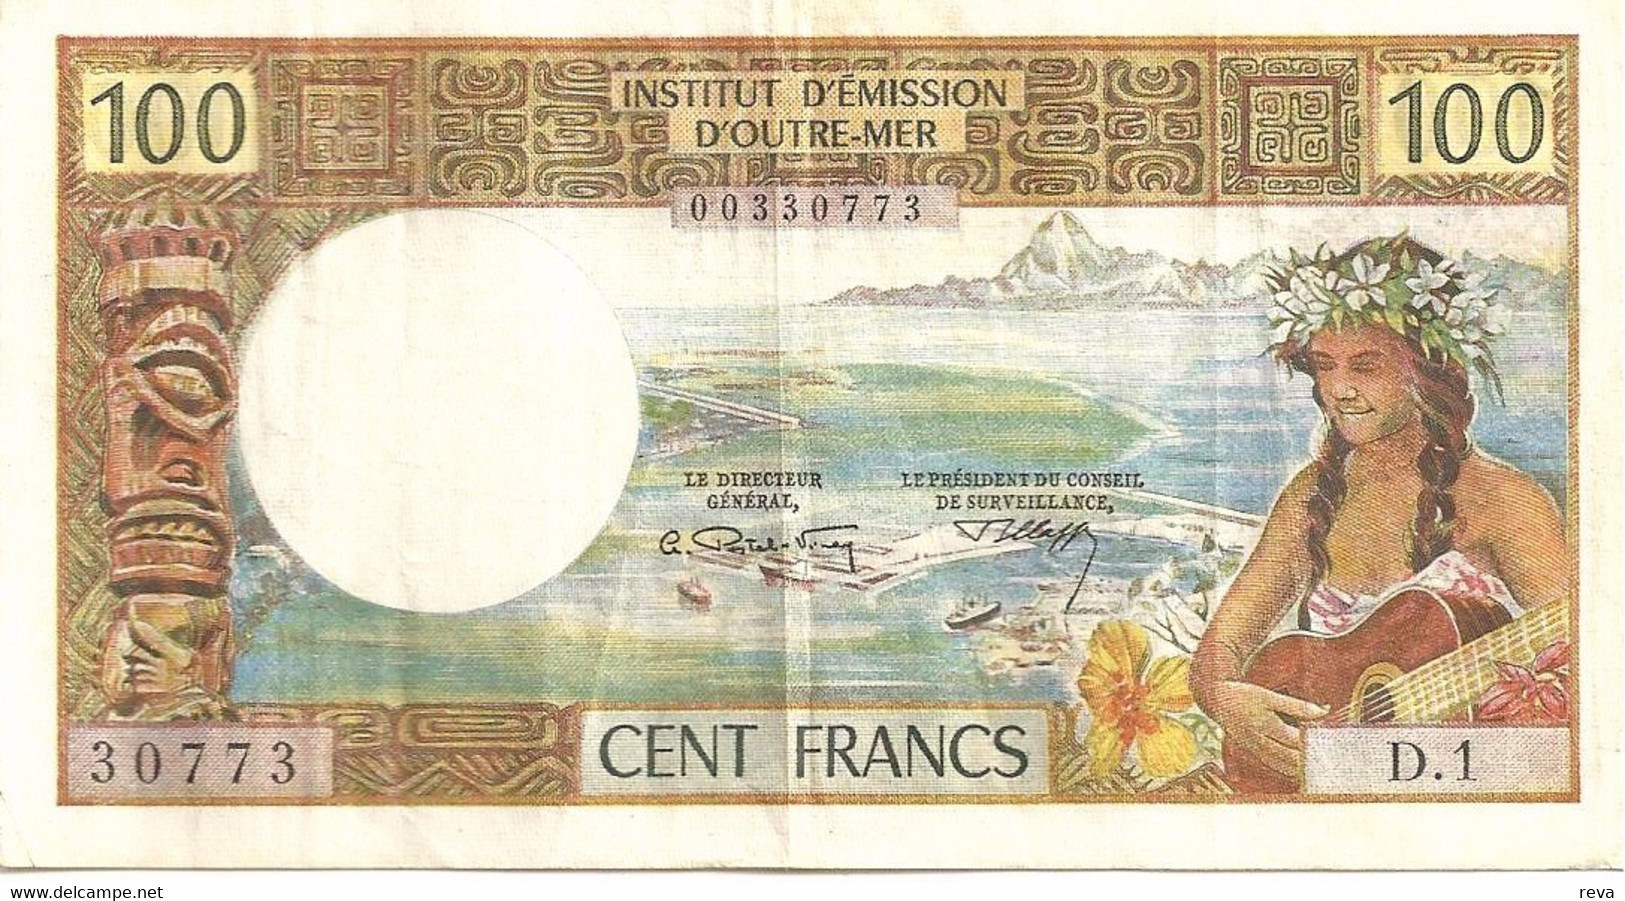 FRENCH POLYNESIA 100 FRANCS BROWN WOMAN FRONT WOMAN HEAD BACK NOT DATED(1971) P24b SIG VARIETY F READ DESCRIPTION!! - Papeete (Polynésie Française 1914-1985)